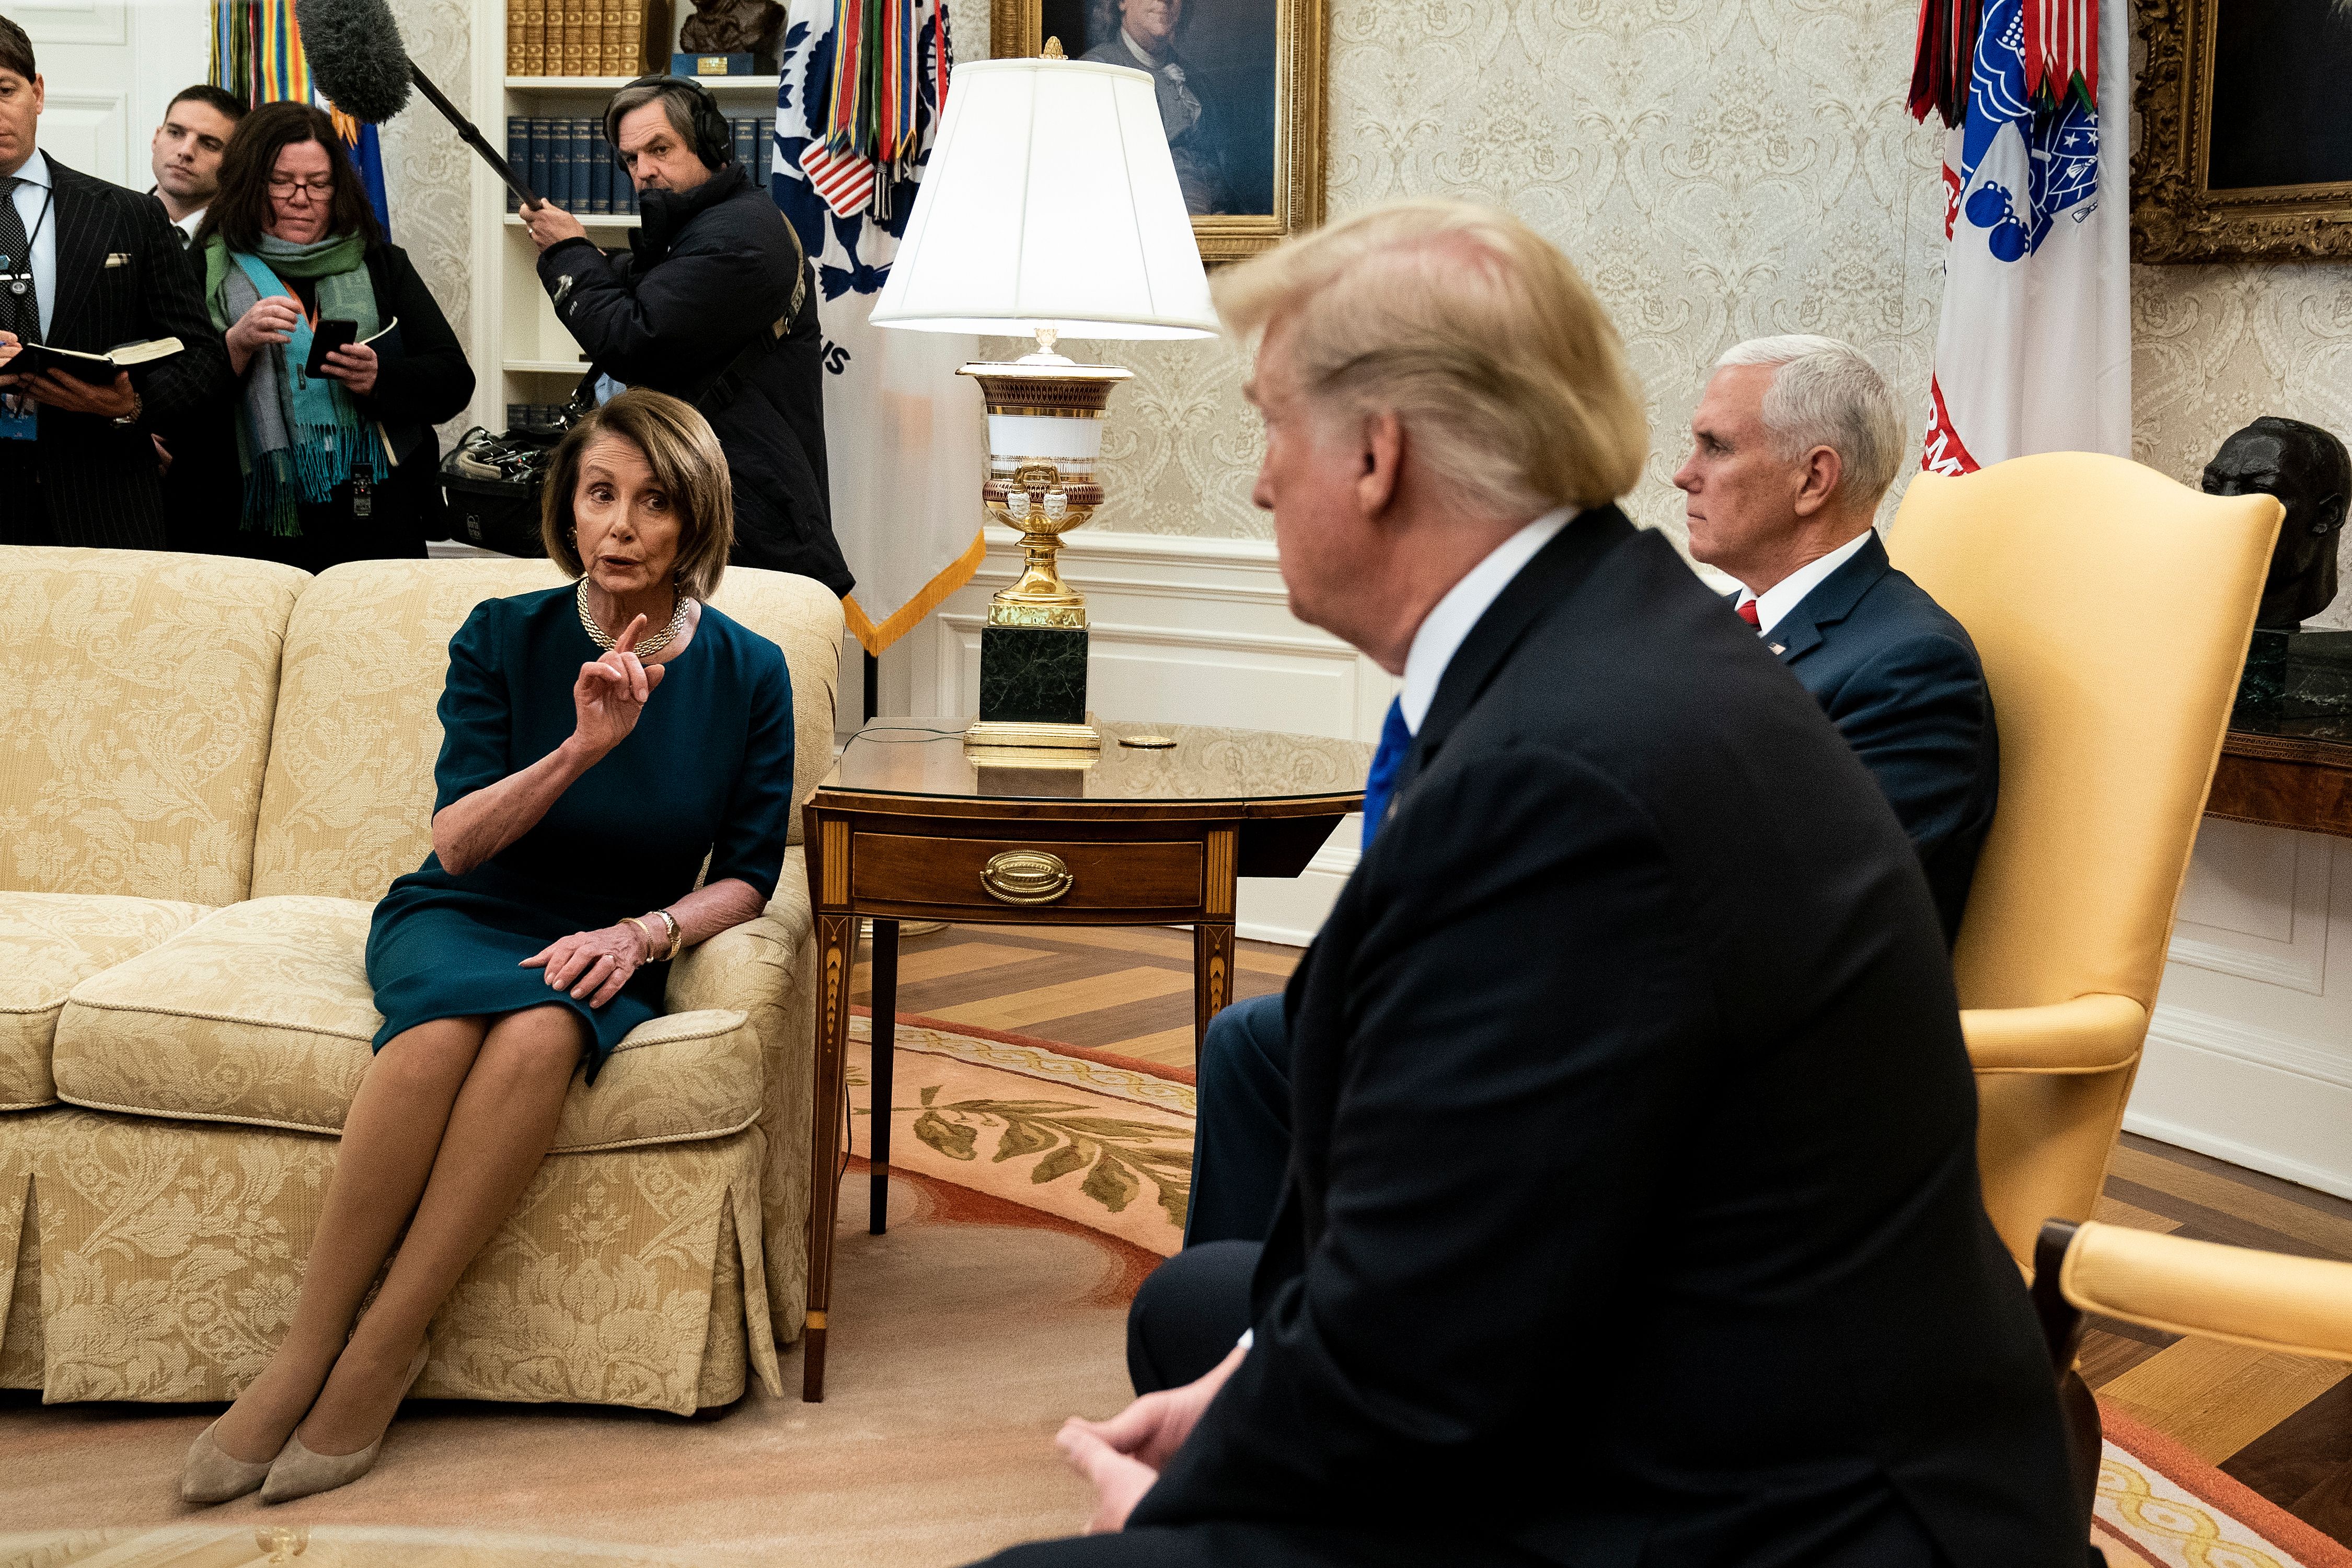 Pelosi and Trump in the Oval Office